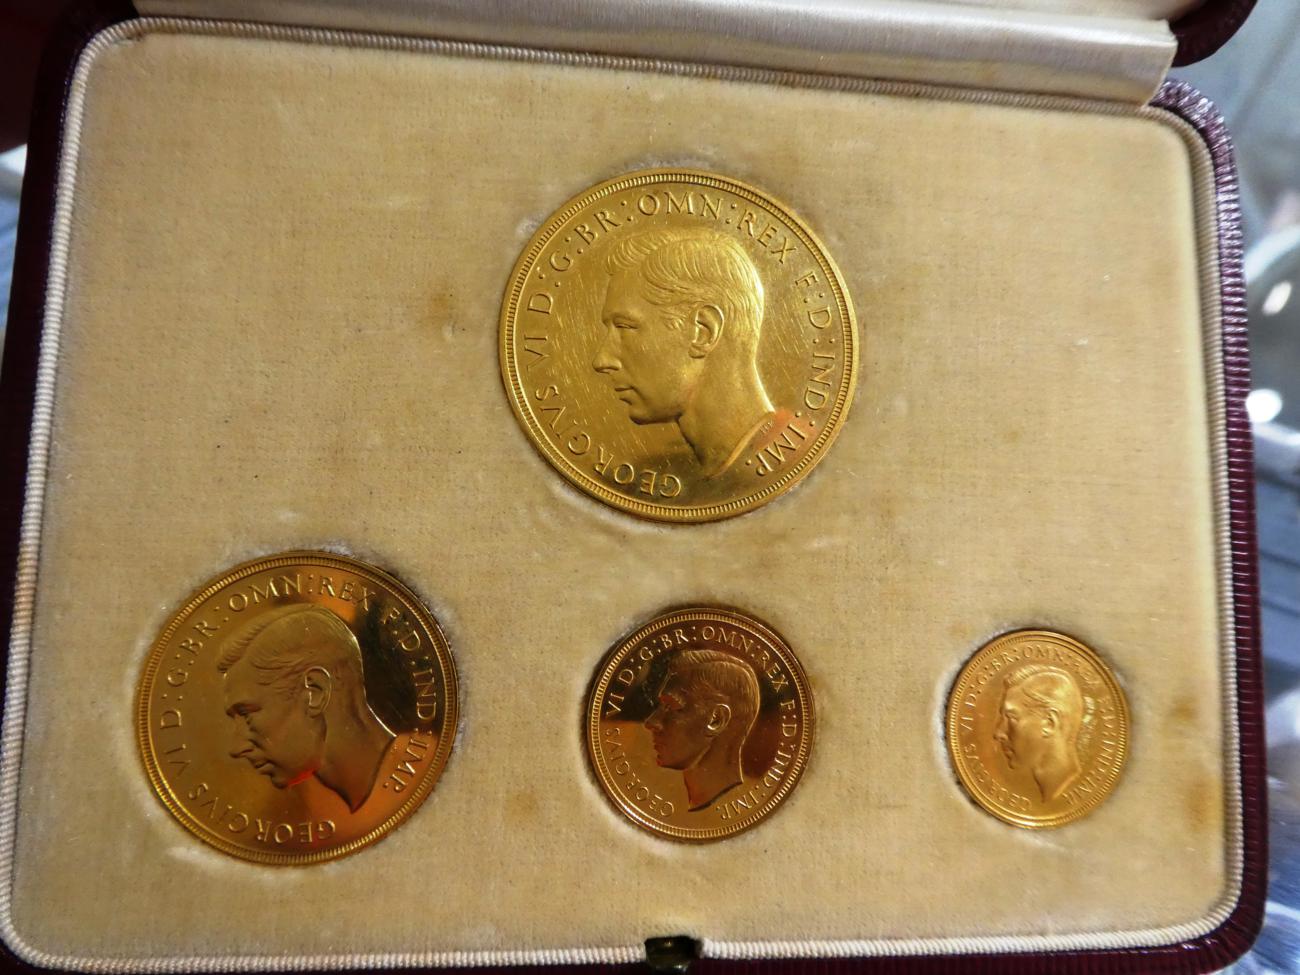 1937 George V Four Coin Gold Proof Set As issued in official original box of issue - Image 3 of 3